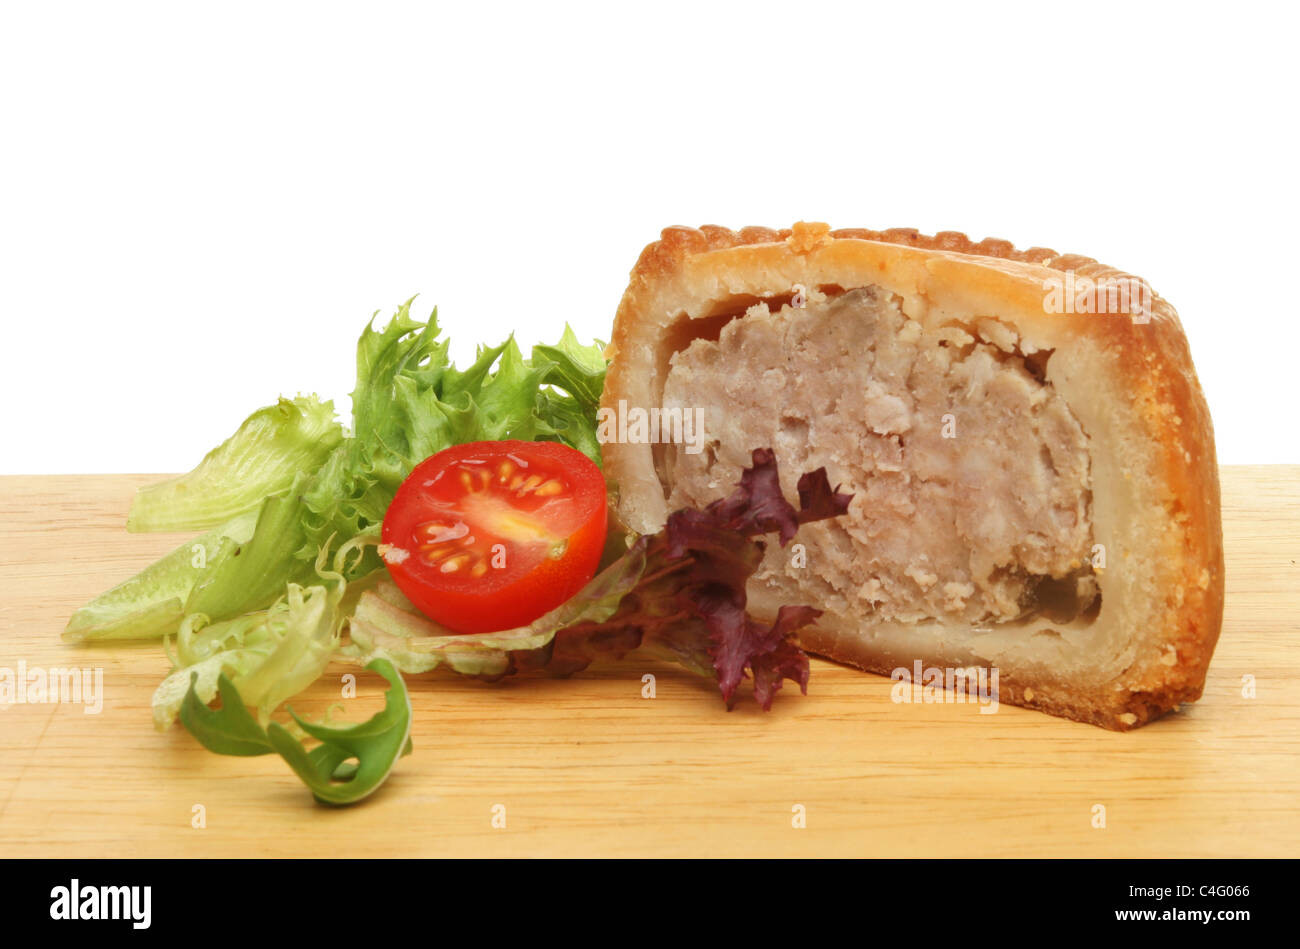 A portion of pork pie with salad garnish on a wooden food preparation board Stock Photo